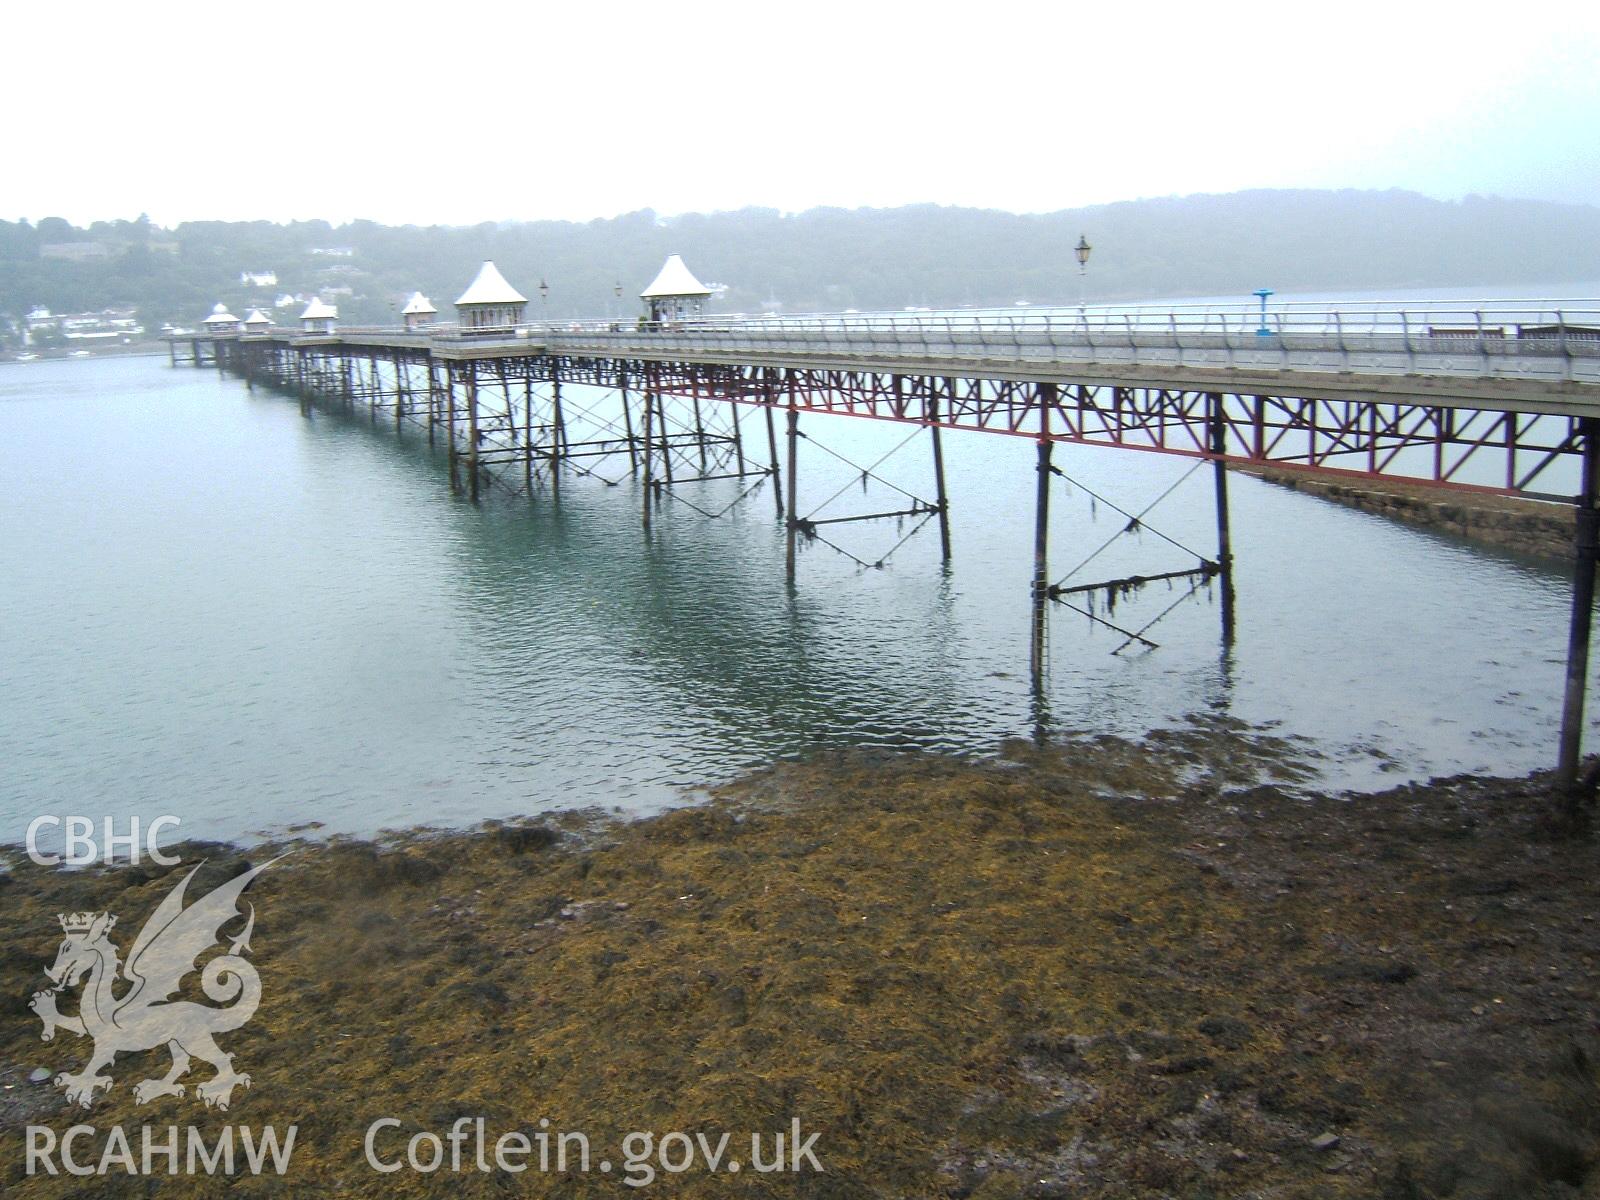 South-western side of the pier from the Bangor end.